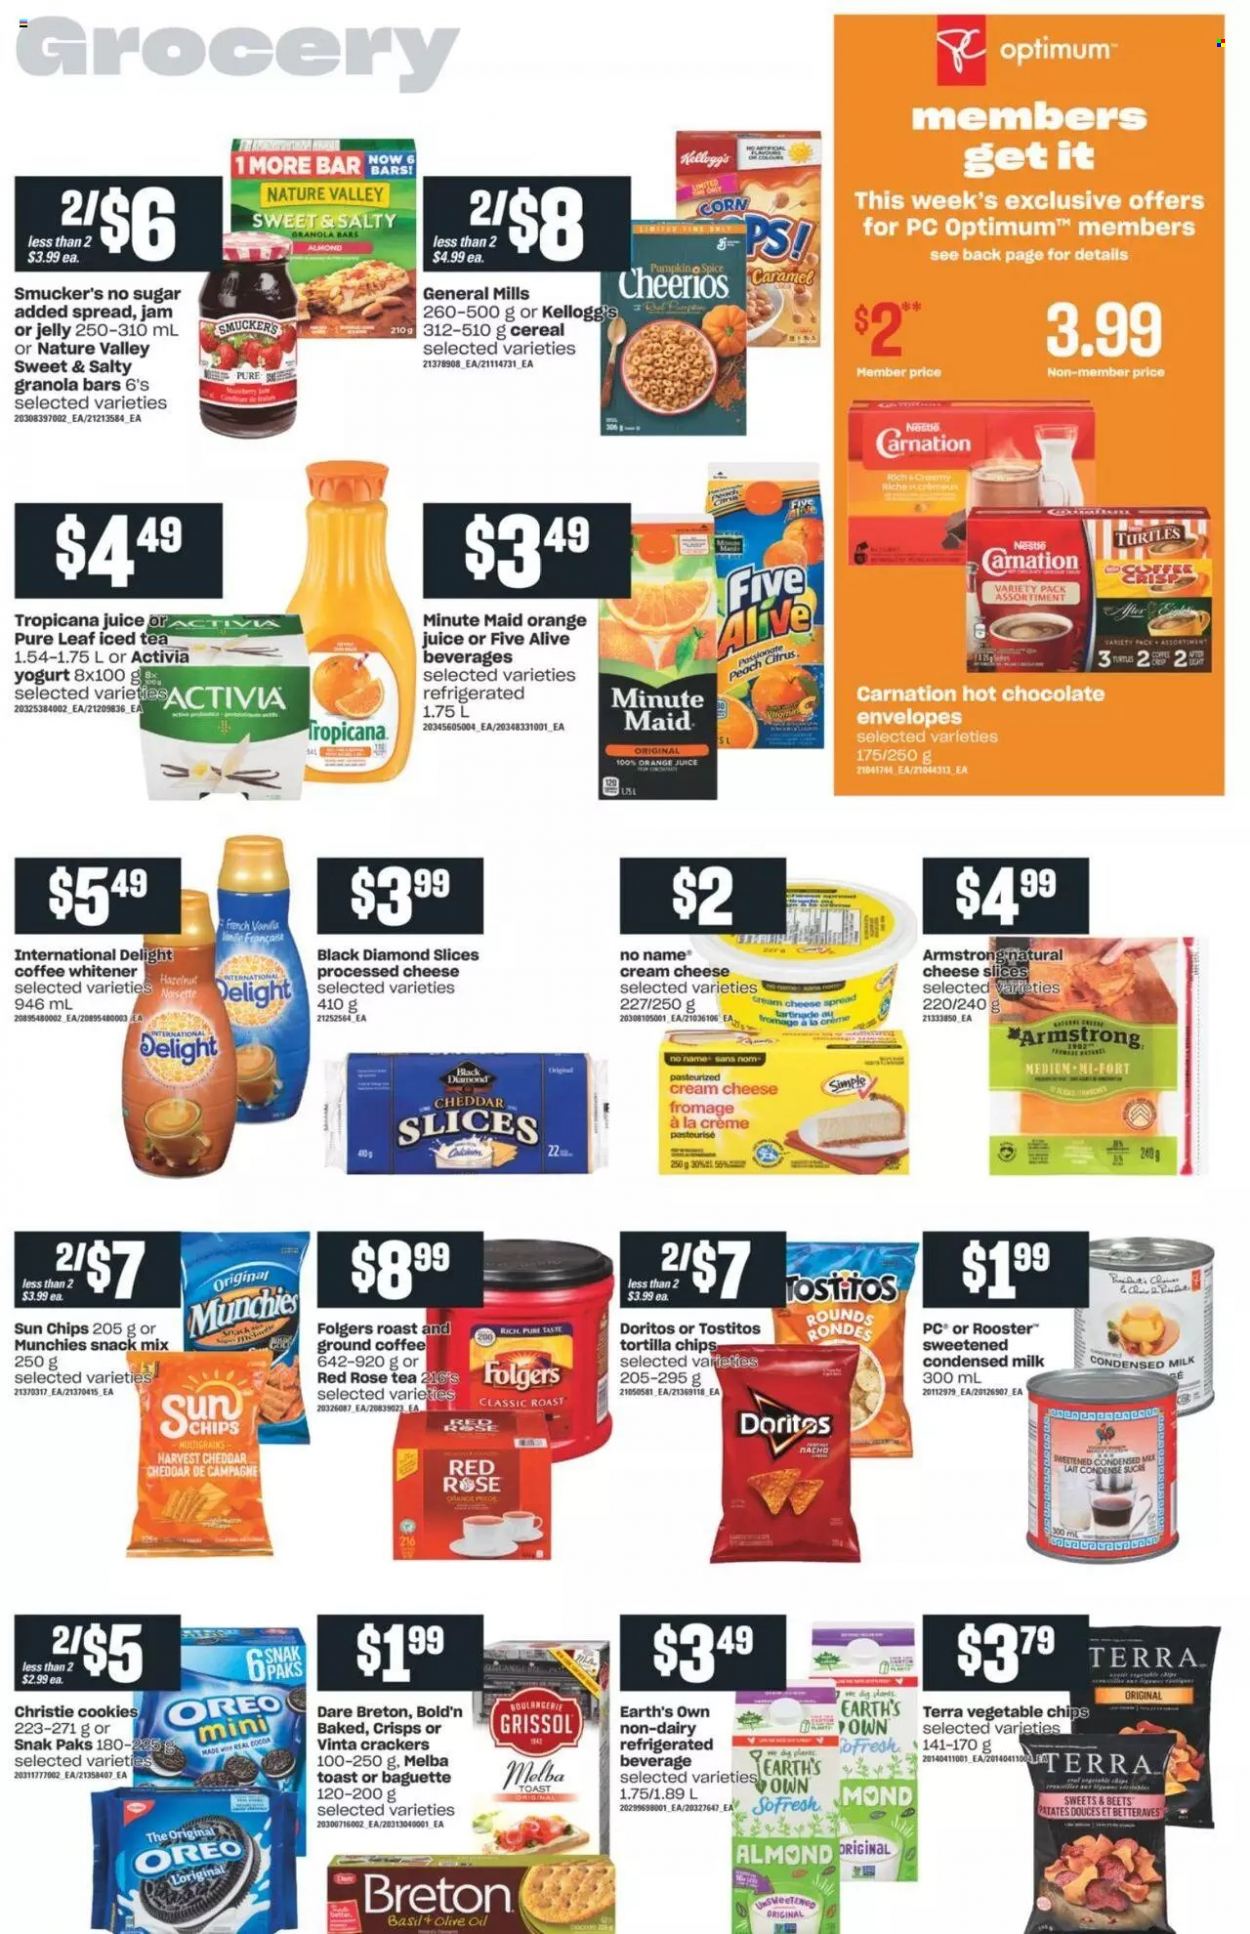 thumbnail - Independent Flyer - October 07, 2021 - October 13, 2021 - Sales products - corn, No Name, cheese spread, cream cheese, sliced cheese, yoghurt, Activia, milk, condensed milk, cookies, snack, jelly, crackers, Kellogg's, Doritos, tortilla chips, vegetable chips, Tostitos, cocoa, cereals, Cheerios, granola bar, Nature Valley, esponja, spice, fruit jam, orange juice, juice, ice tea, fruit punch, hot chocolate, Pure Leaf, coffee, Folgers, ground coffee, wine, rosé wine, envelope, Optimum, Oreo, baguette, chips. Page 8.